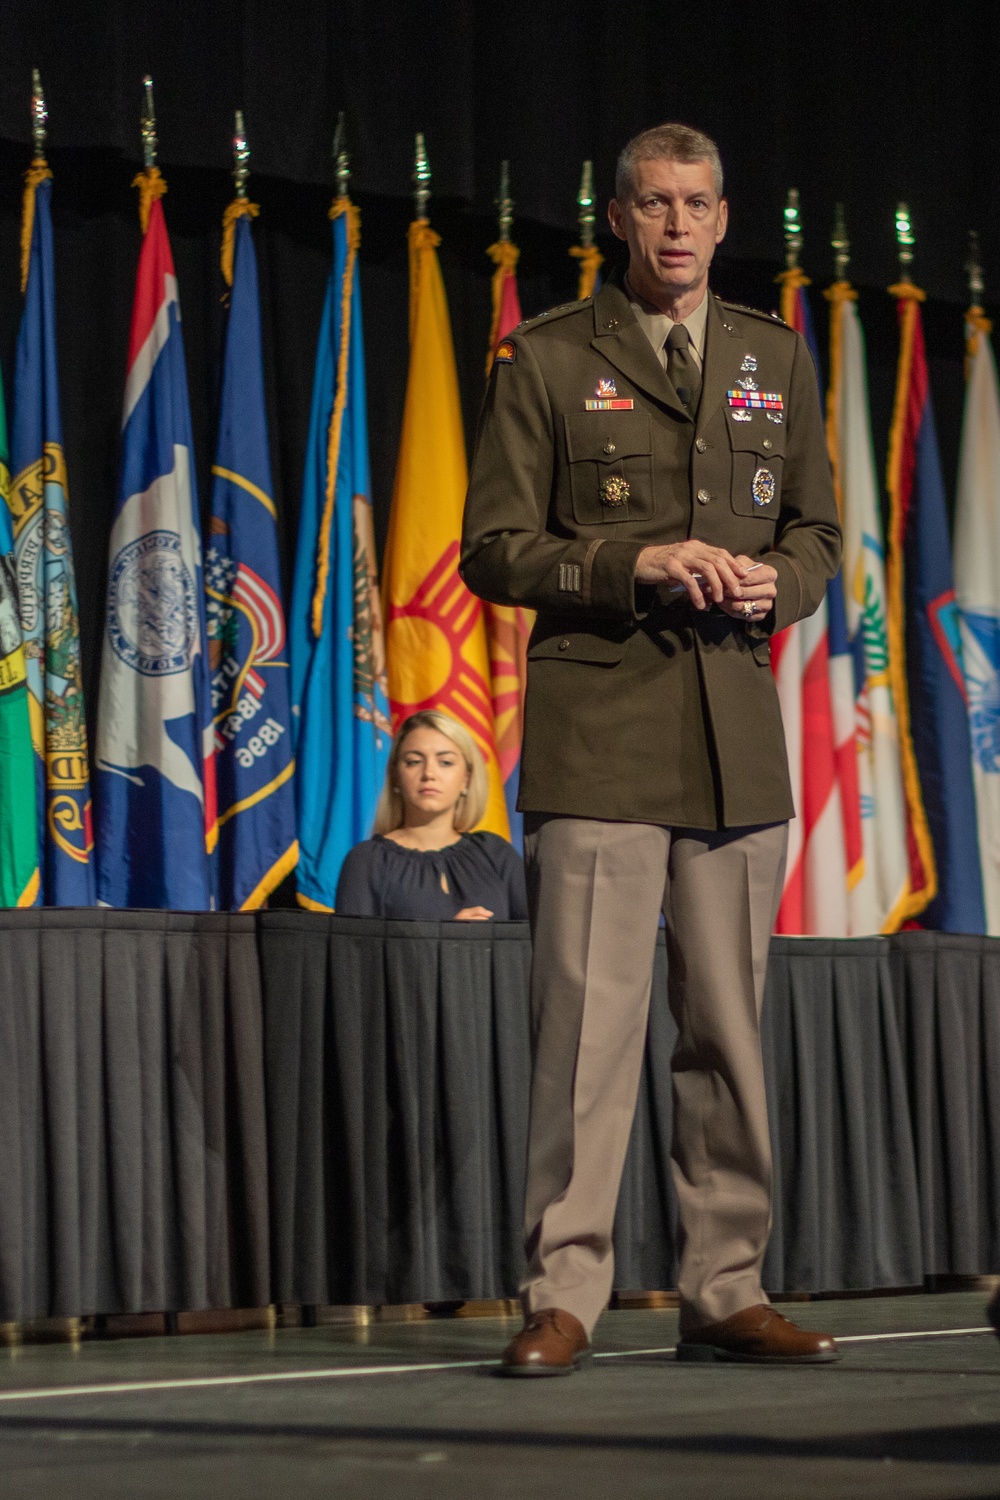 Director of Army National Guard Addresses NGAUS